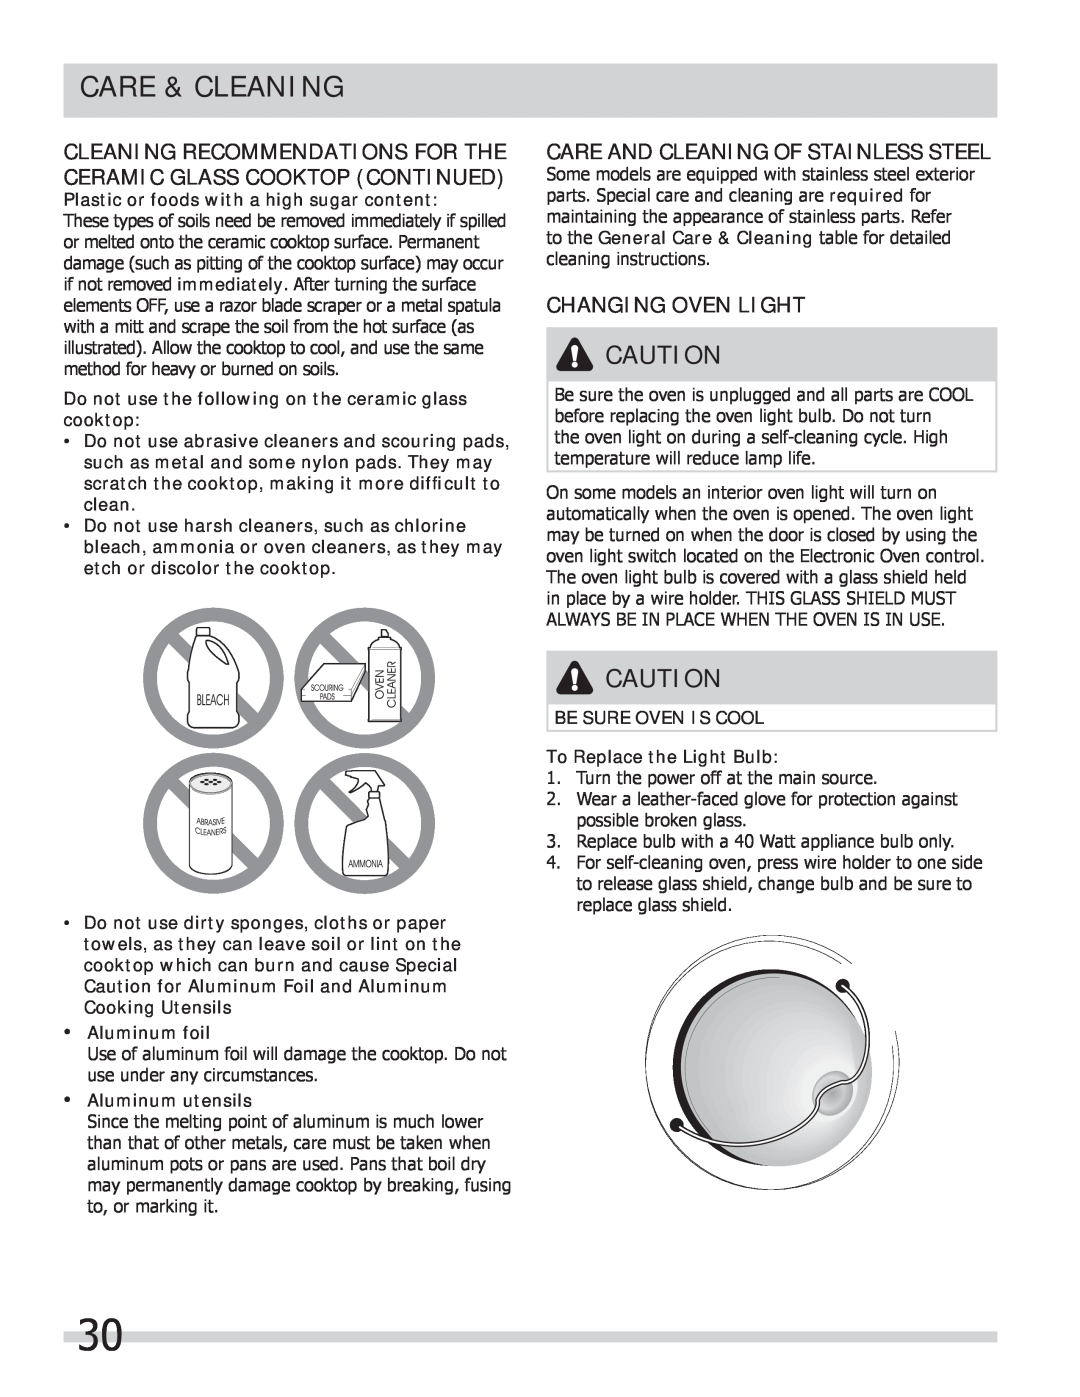 Frigidaire FGEF306TMF Cleaning Recommendations For The Ceramic Glass Cooktop Continued, Changing Oven Light, Aluminum foil 